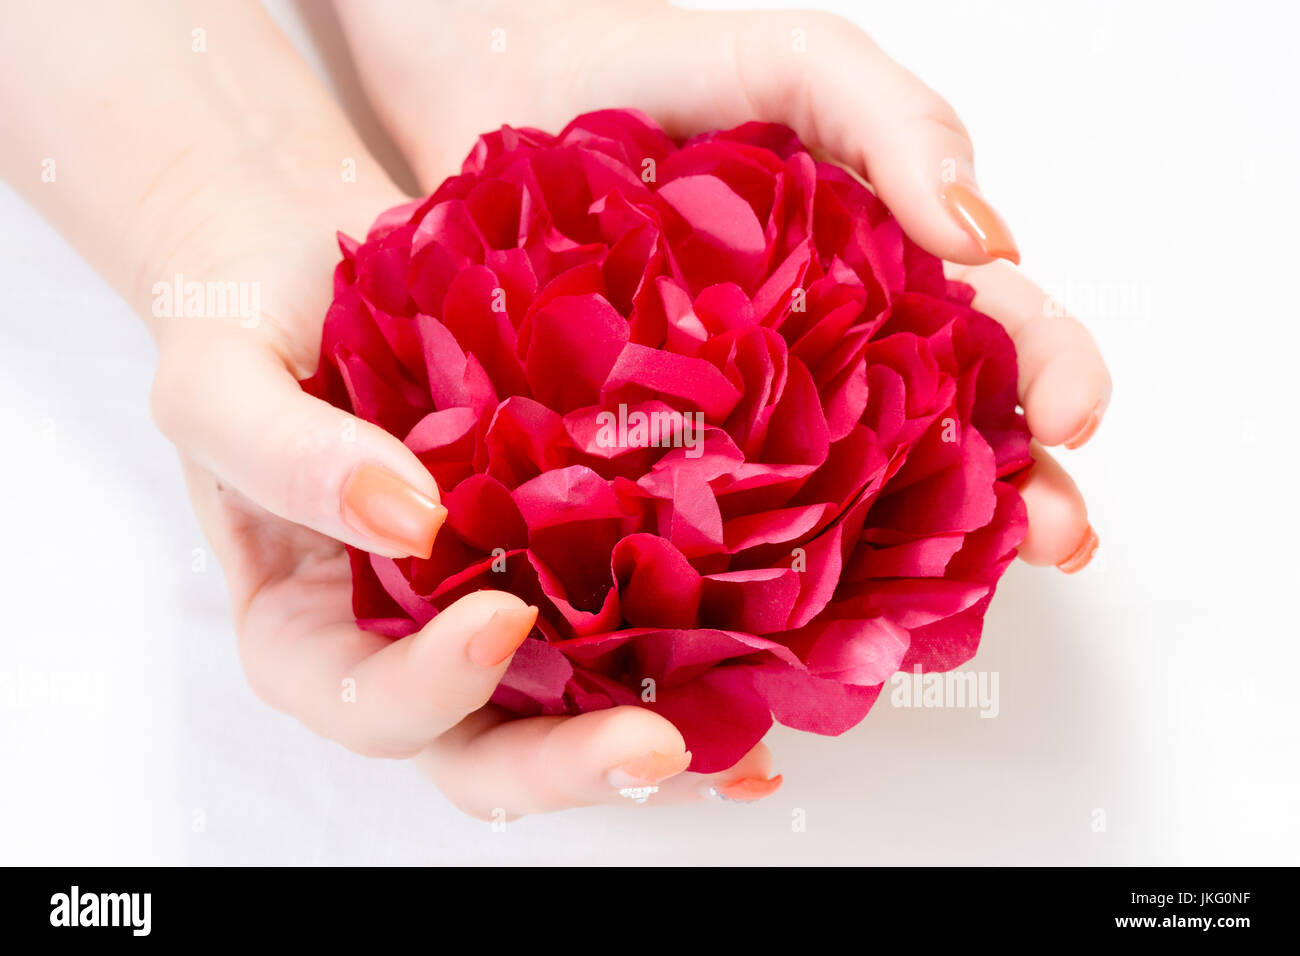 Beautiful red petal in woman's hands with nail art isolated on white background Stock Photo